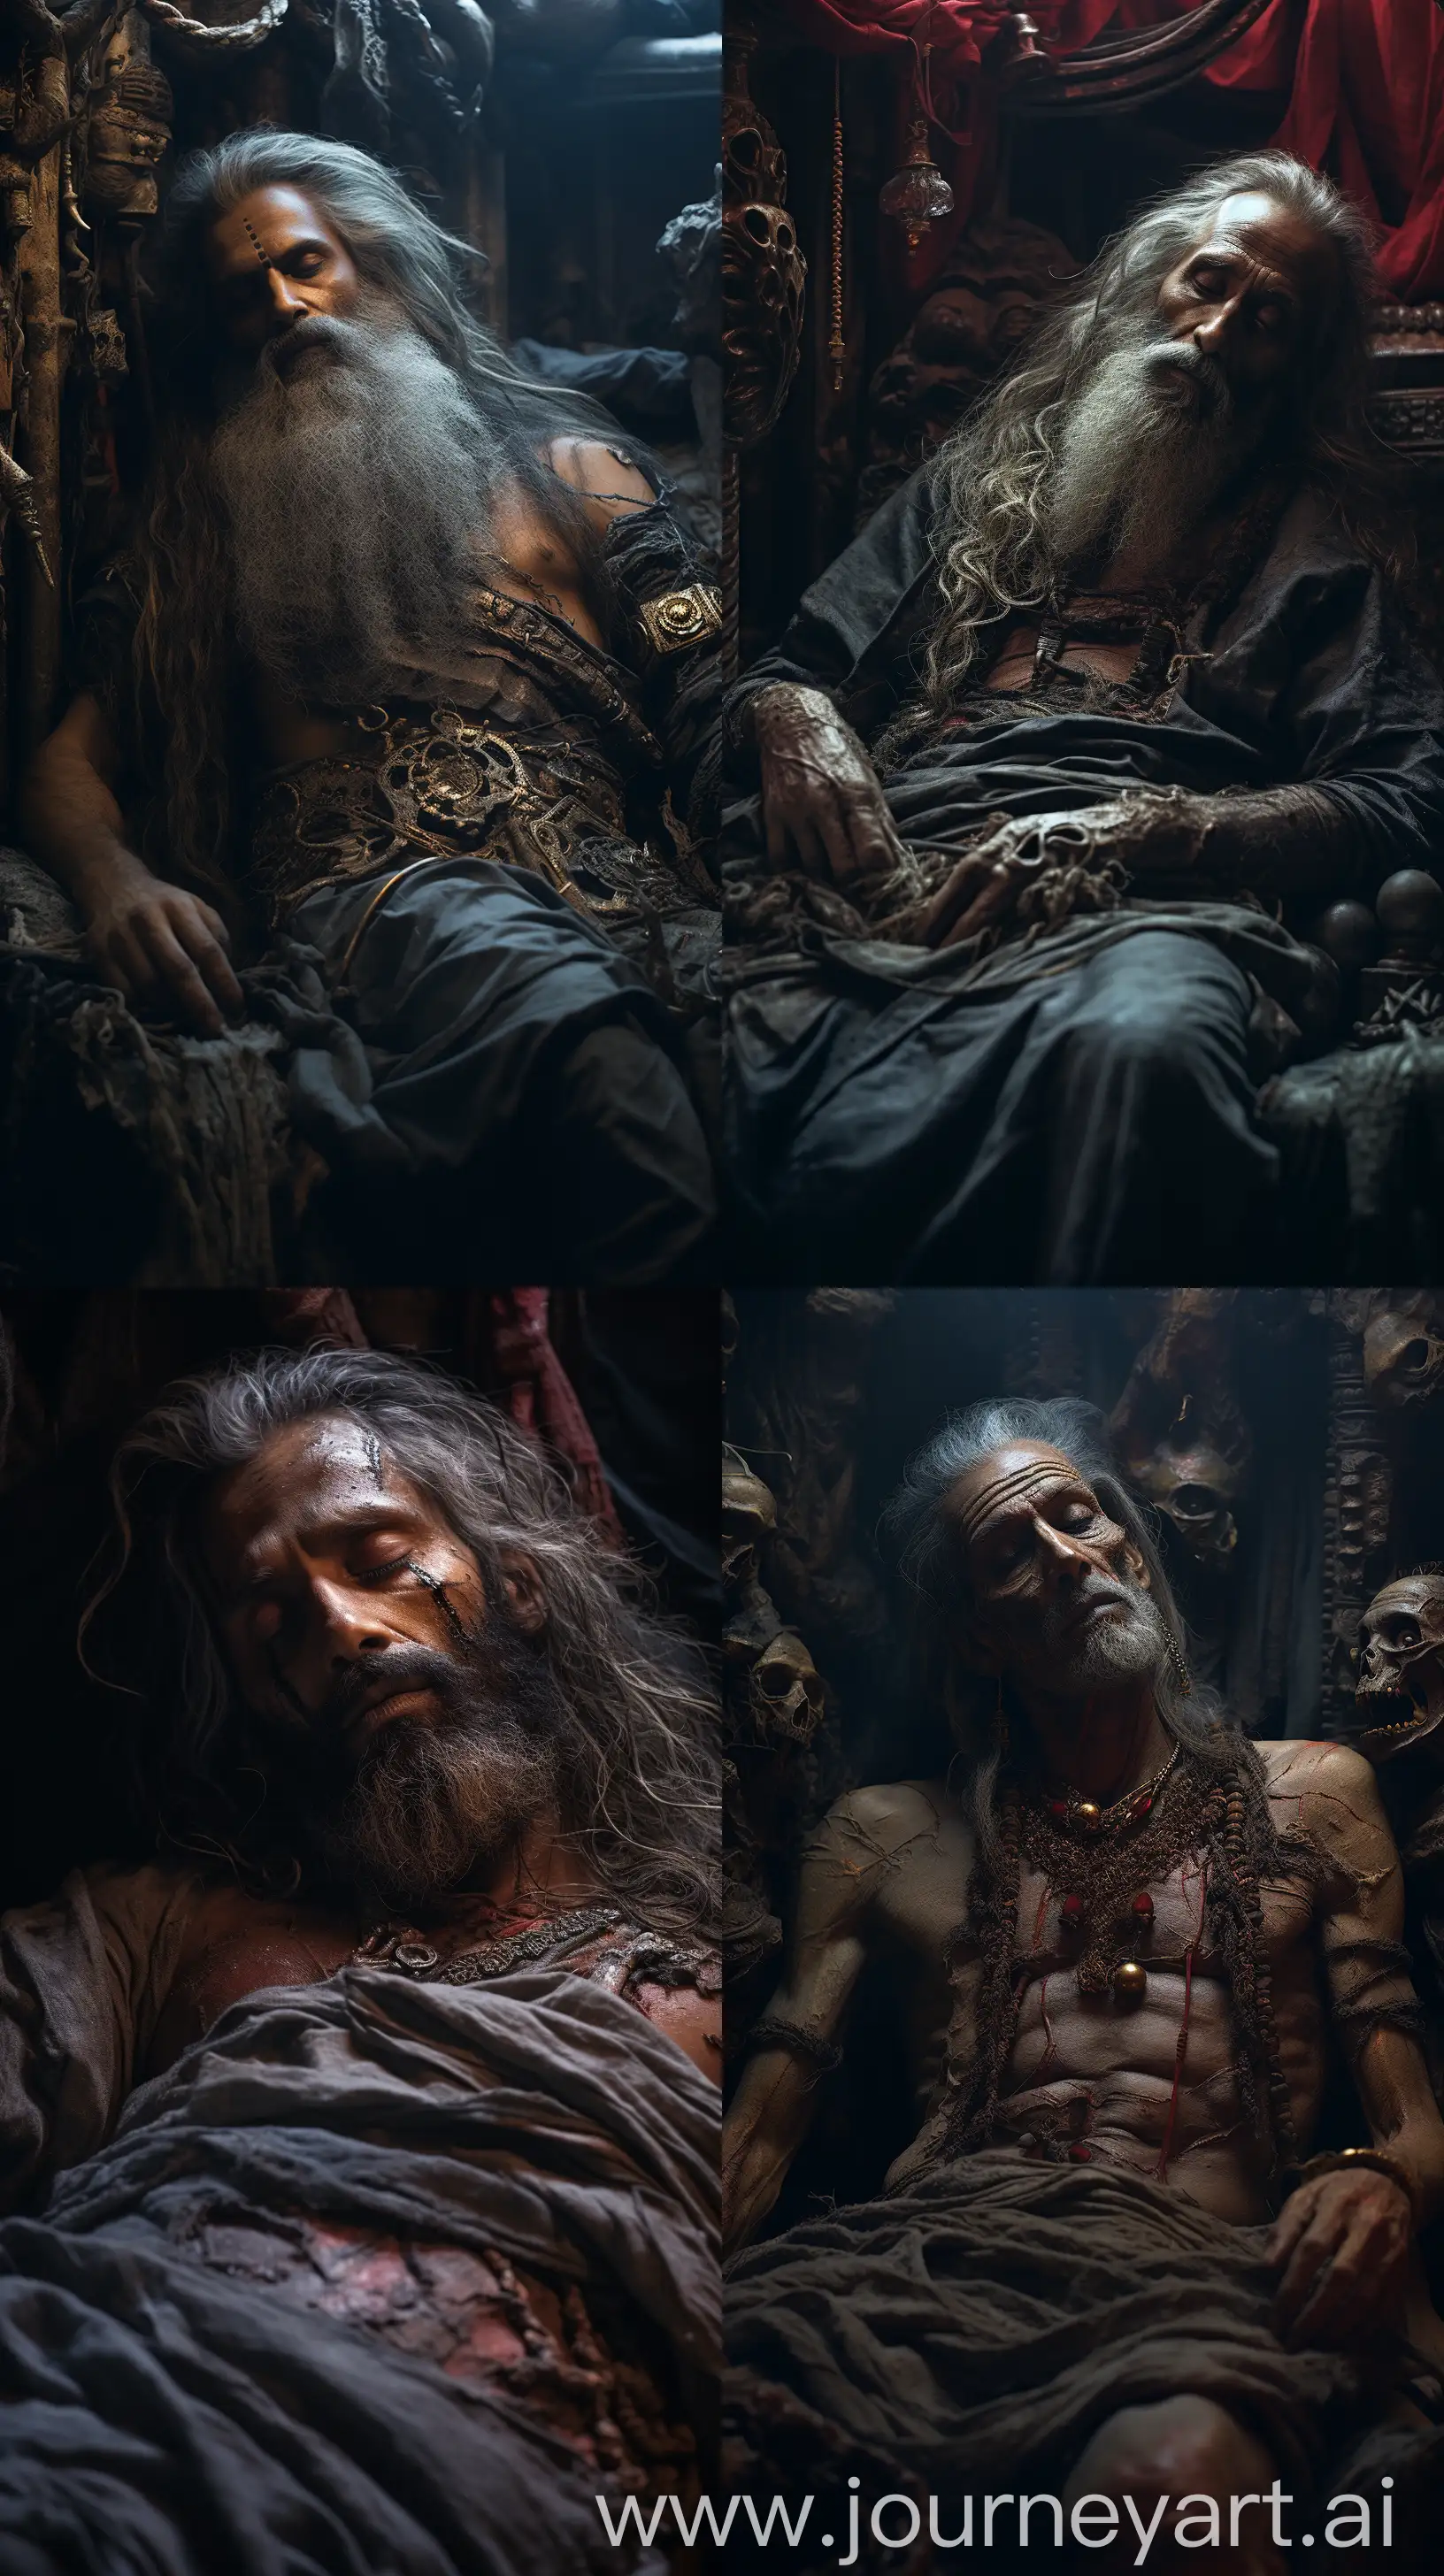 Indian man from ancient times, seen as if he's being resurrected, rising from his dEath bed, amidst a war, intricate details, 8k quality image --s 200 --ar 9:16 --v 5.2